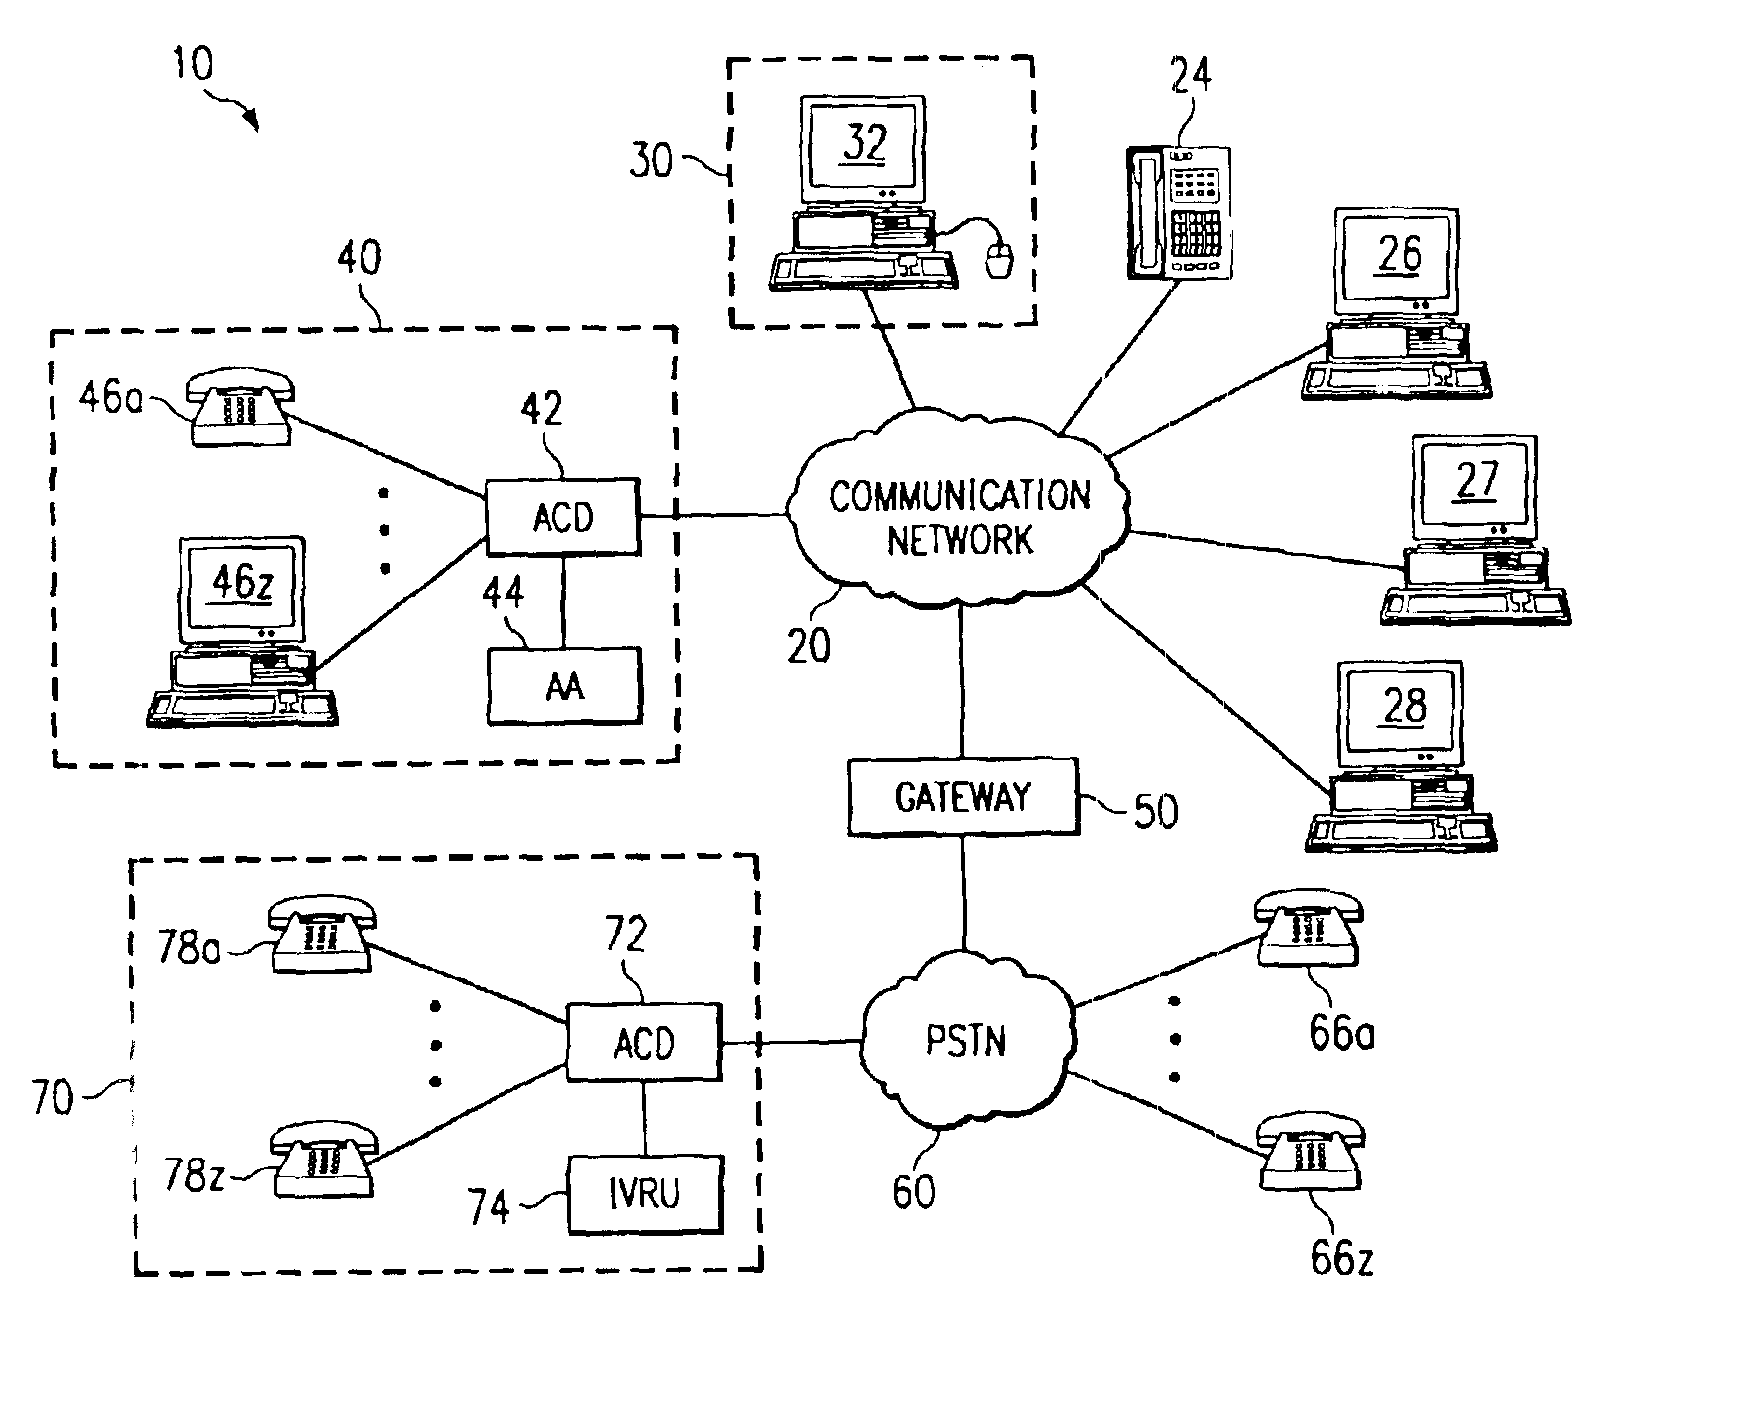 System and method for placing a telephone call